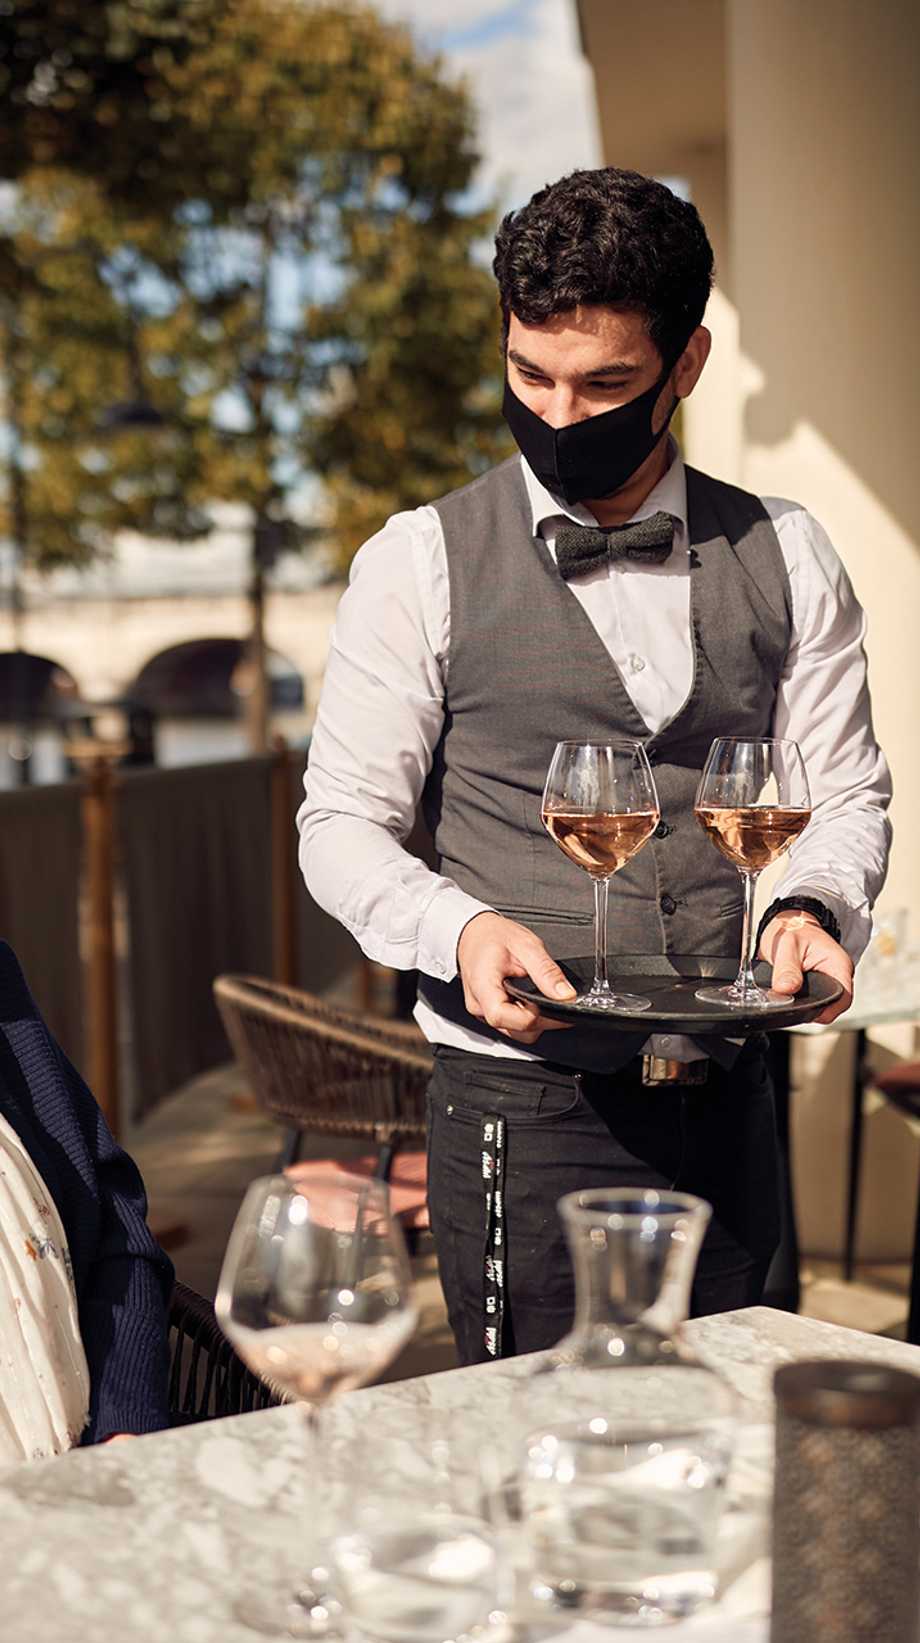 A team member wearing a face mask, waistcoat, and bowtie serves two glasses of wine to waiting guests, sitting in the sun.